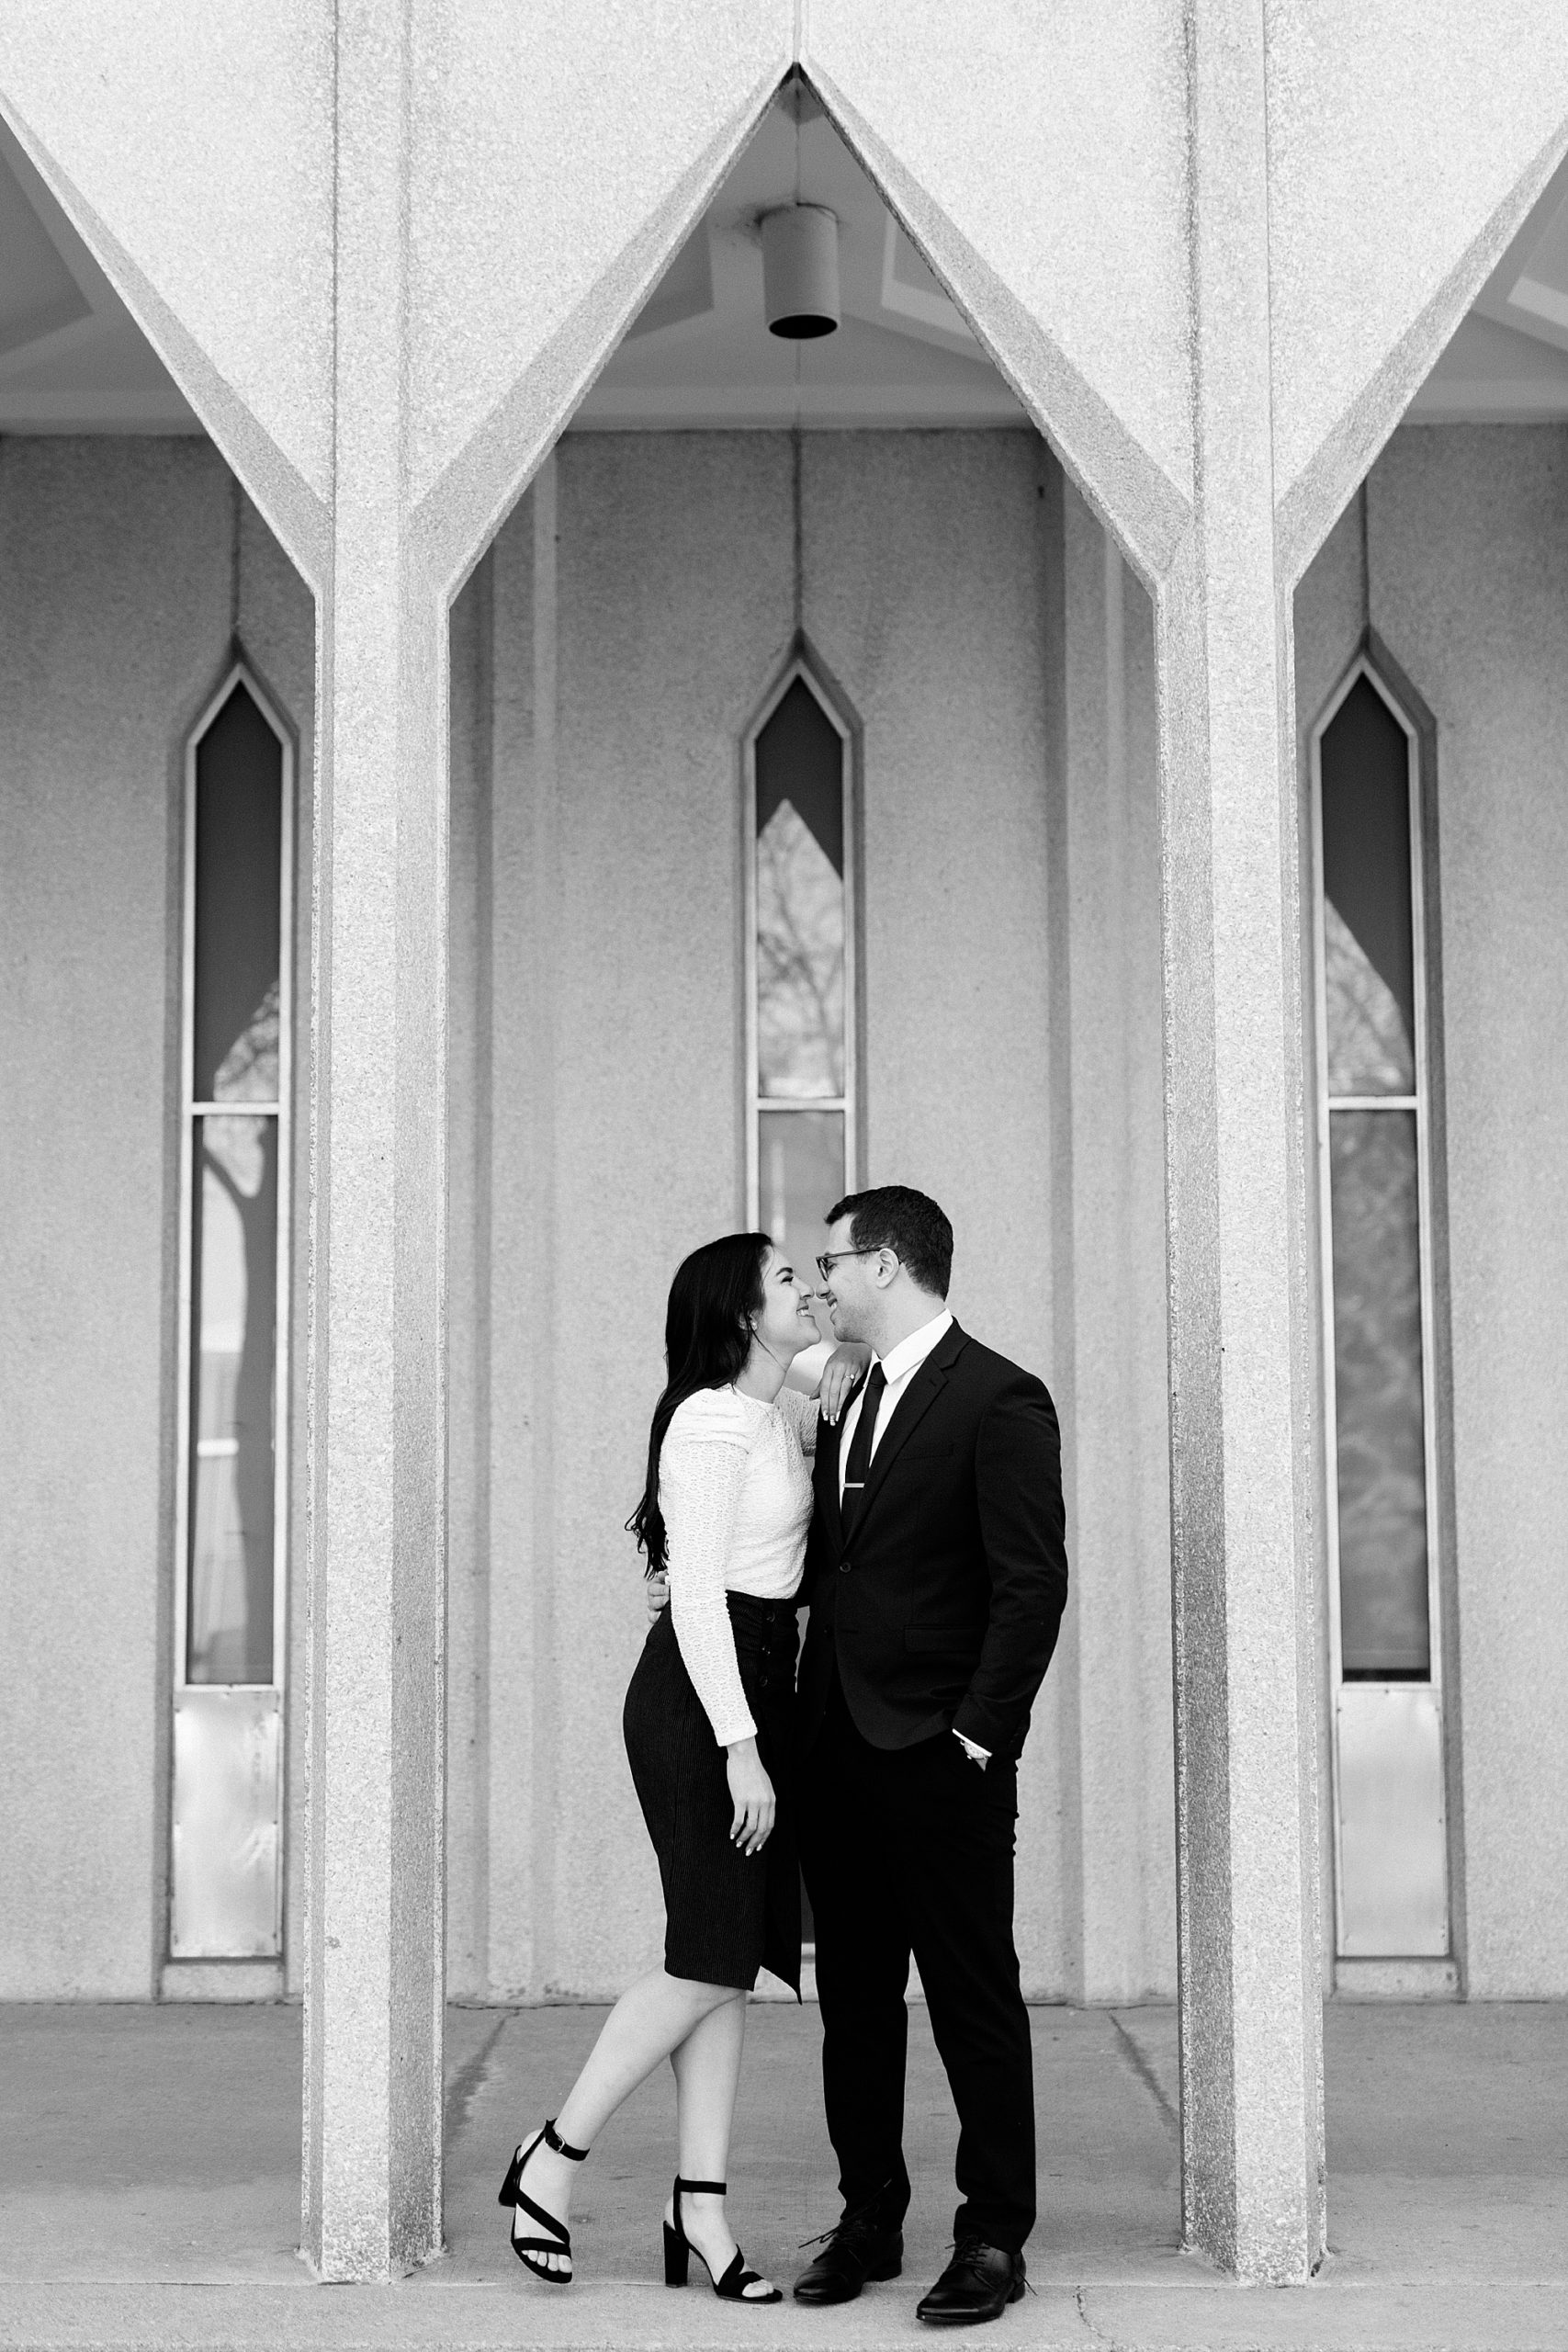 A late winter Downtown Detroit engagement at Wayne State University and the Detroit Institute of Arts by Breanne Rochelle Photography.